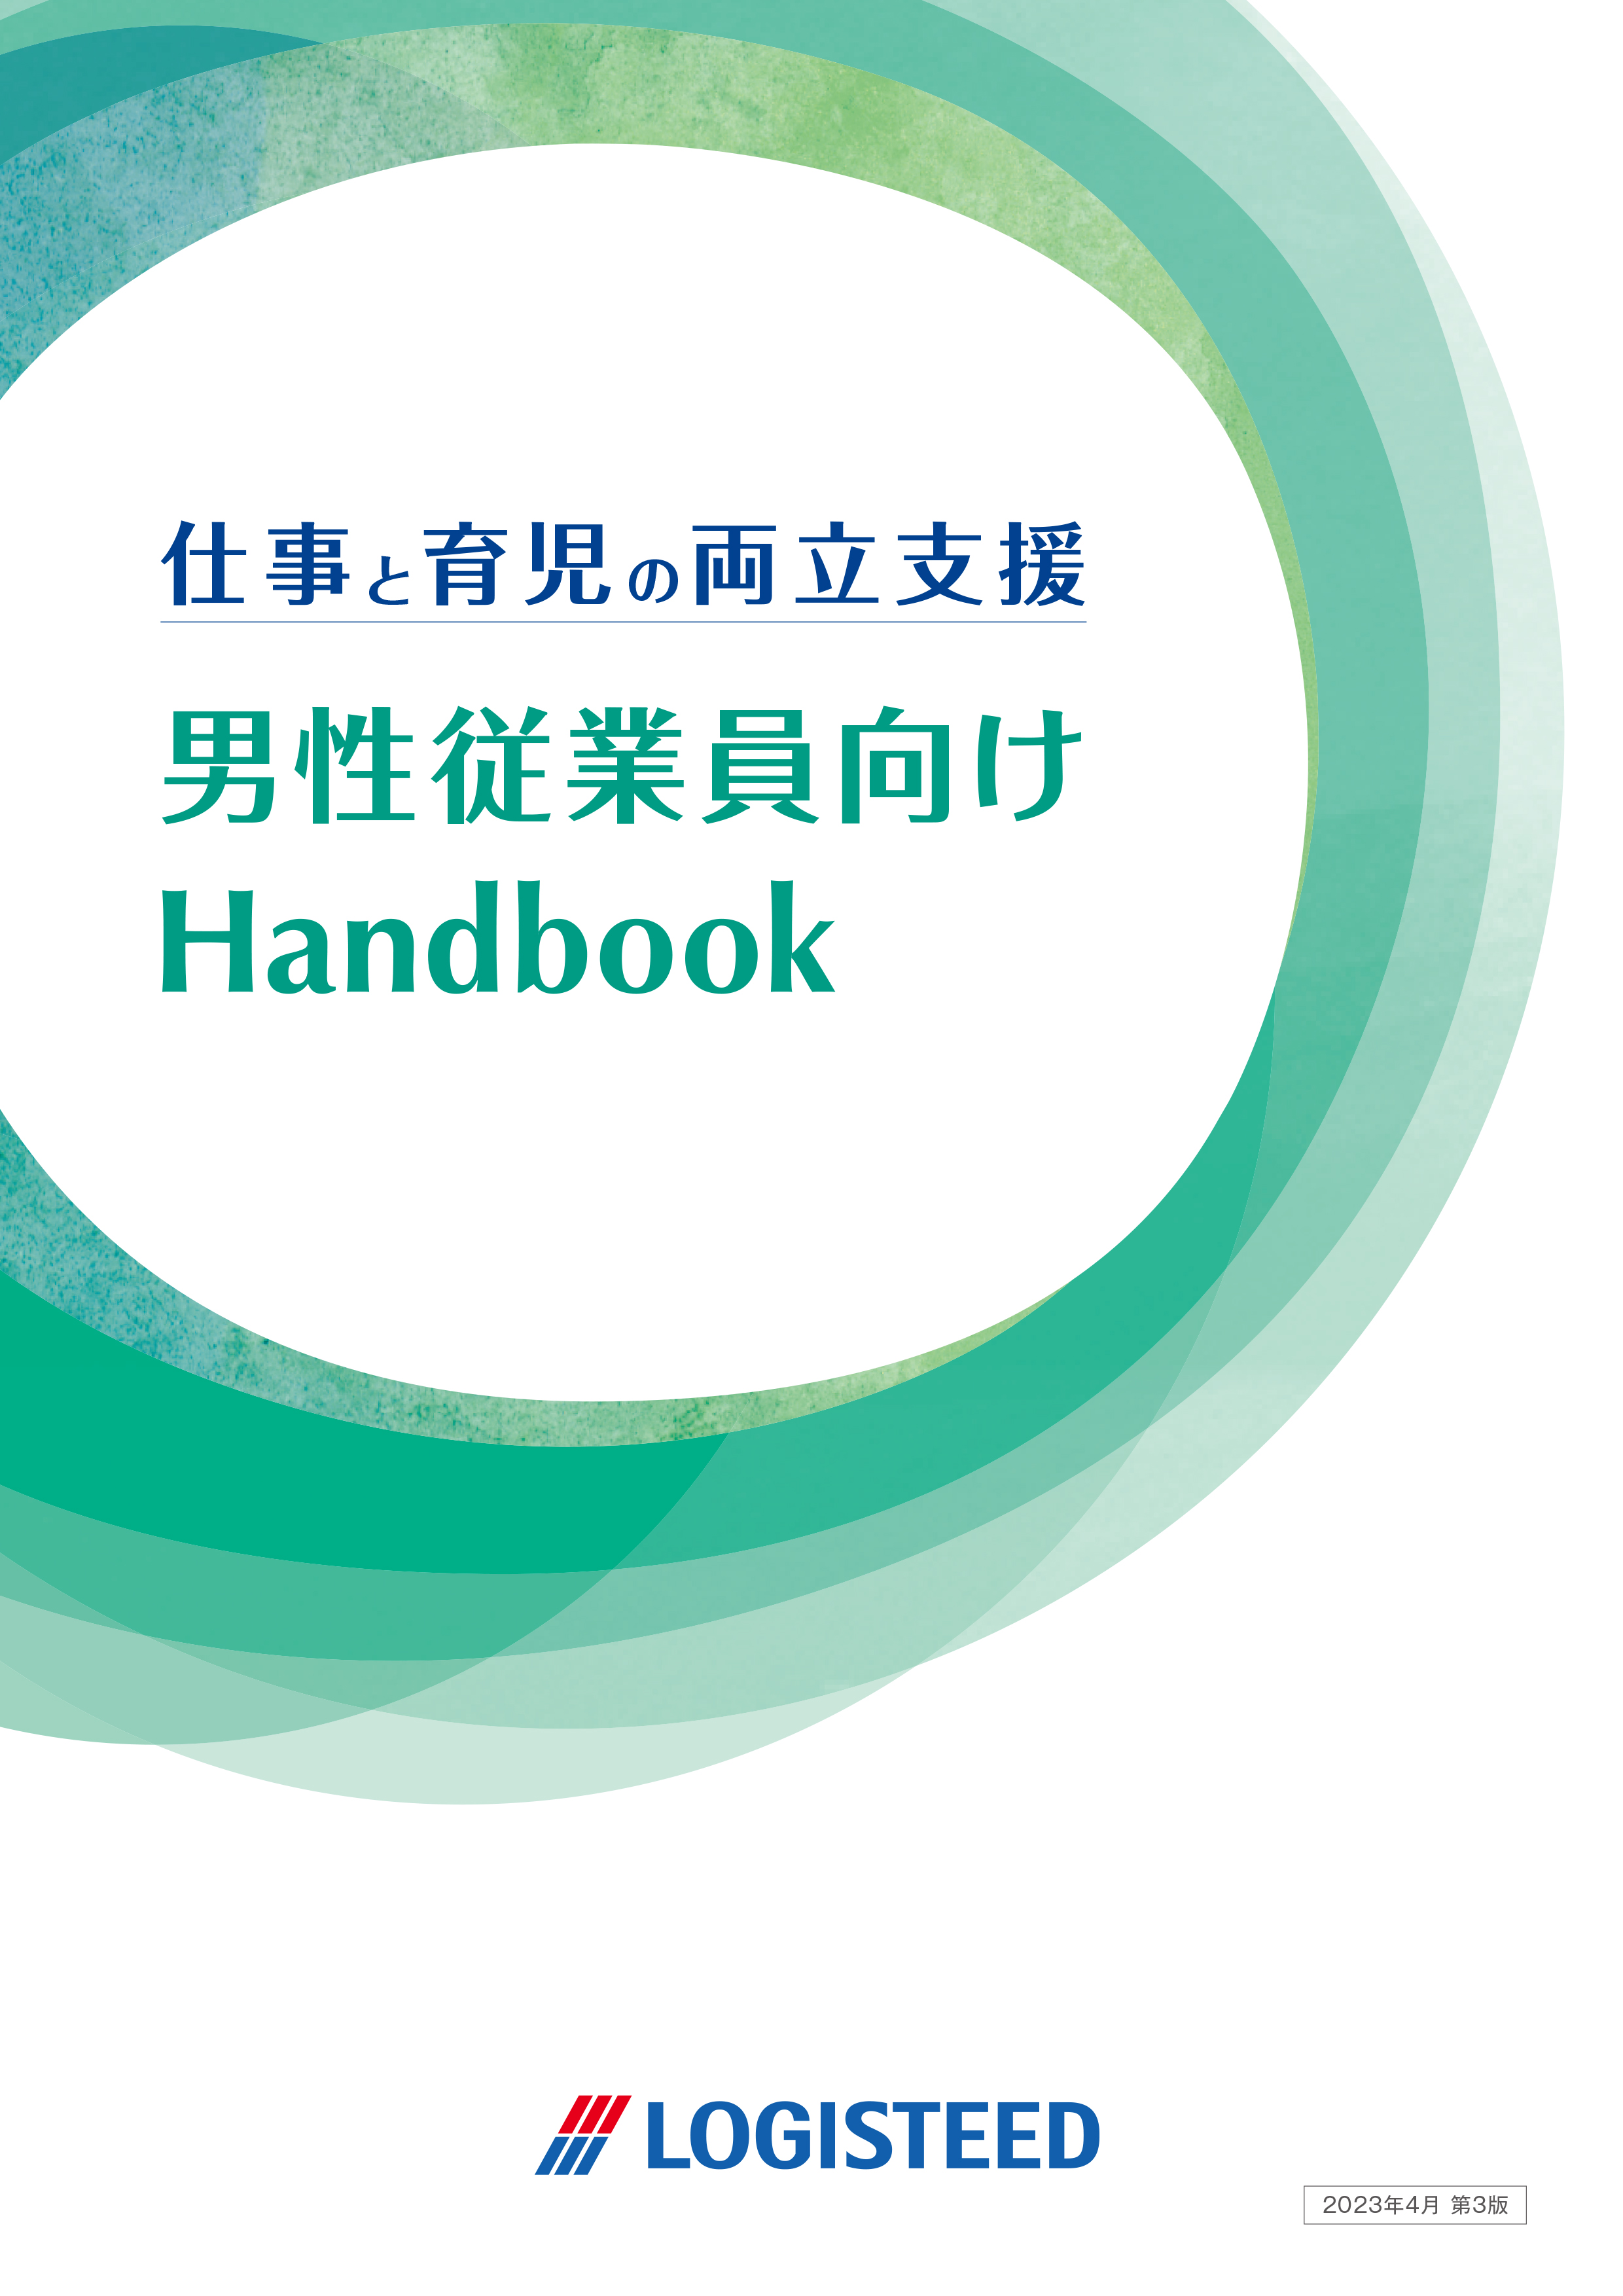 Handbook for Supporting Balancing Work and Childrearing